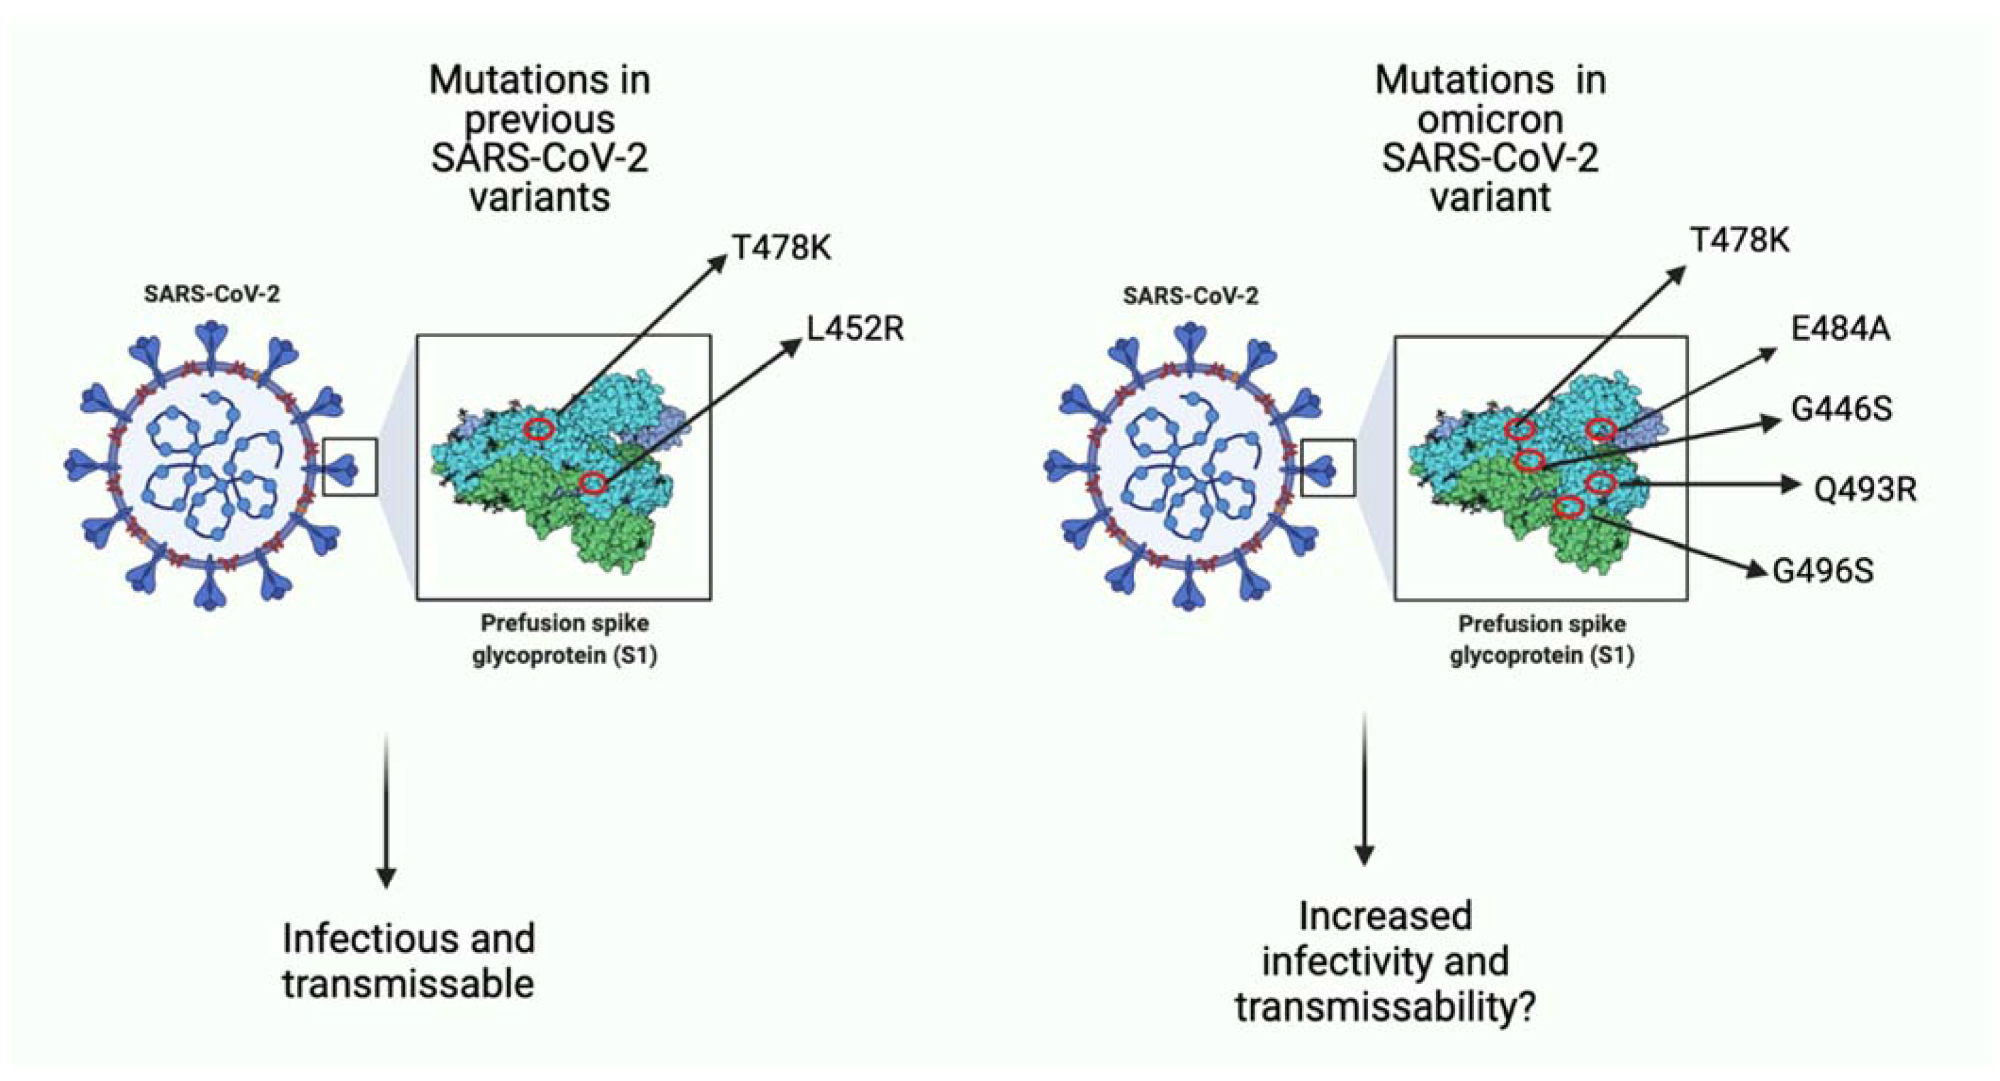 A comparison of few key missense mutations in the spike protein of previous SARS-CoV-2 variants and the omicron variant. As seen in the image on the left, previous variants (i.e., delta variant) had few mutations that favored viral infection. Seen on the right, omicron has more mutations, many of which function to increase binding affinity to host ACE-2 receptor and potentially increase infectivity ability as well as transmissibility of viral particles. Some mutations such as T478K overlap with previous variants, and some (i.e., E484A) are unique to omicron. (Created with BioRender.com (accessed on 19 December 2021)).